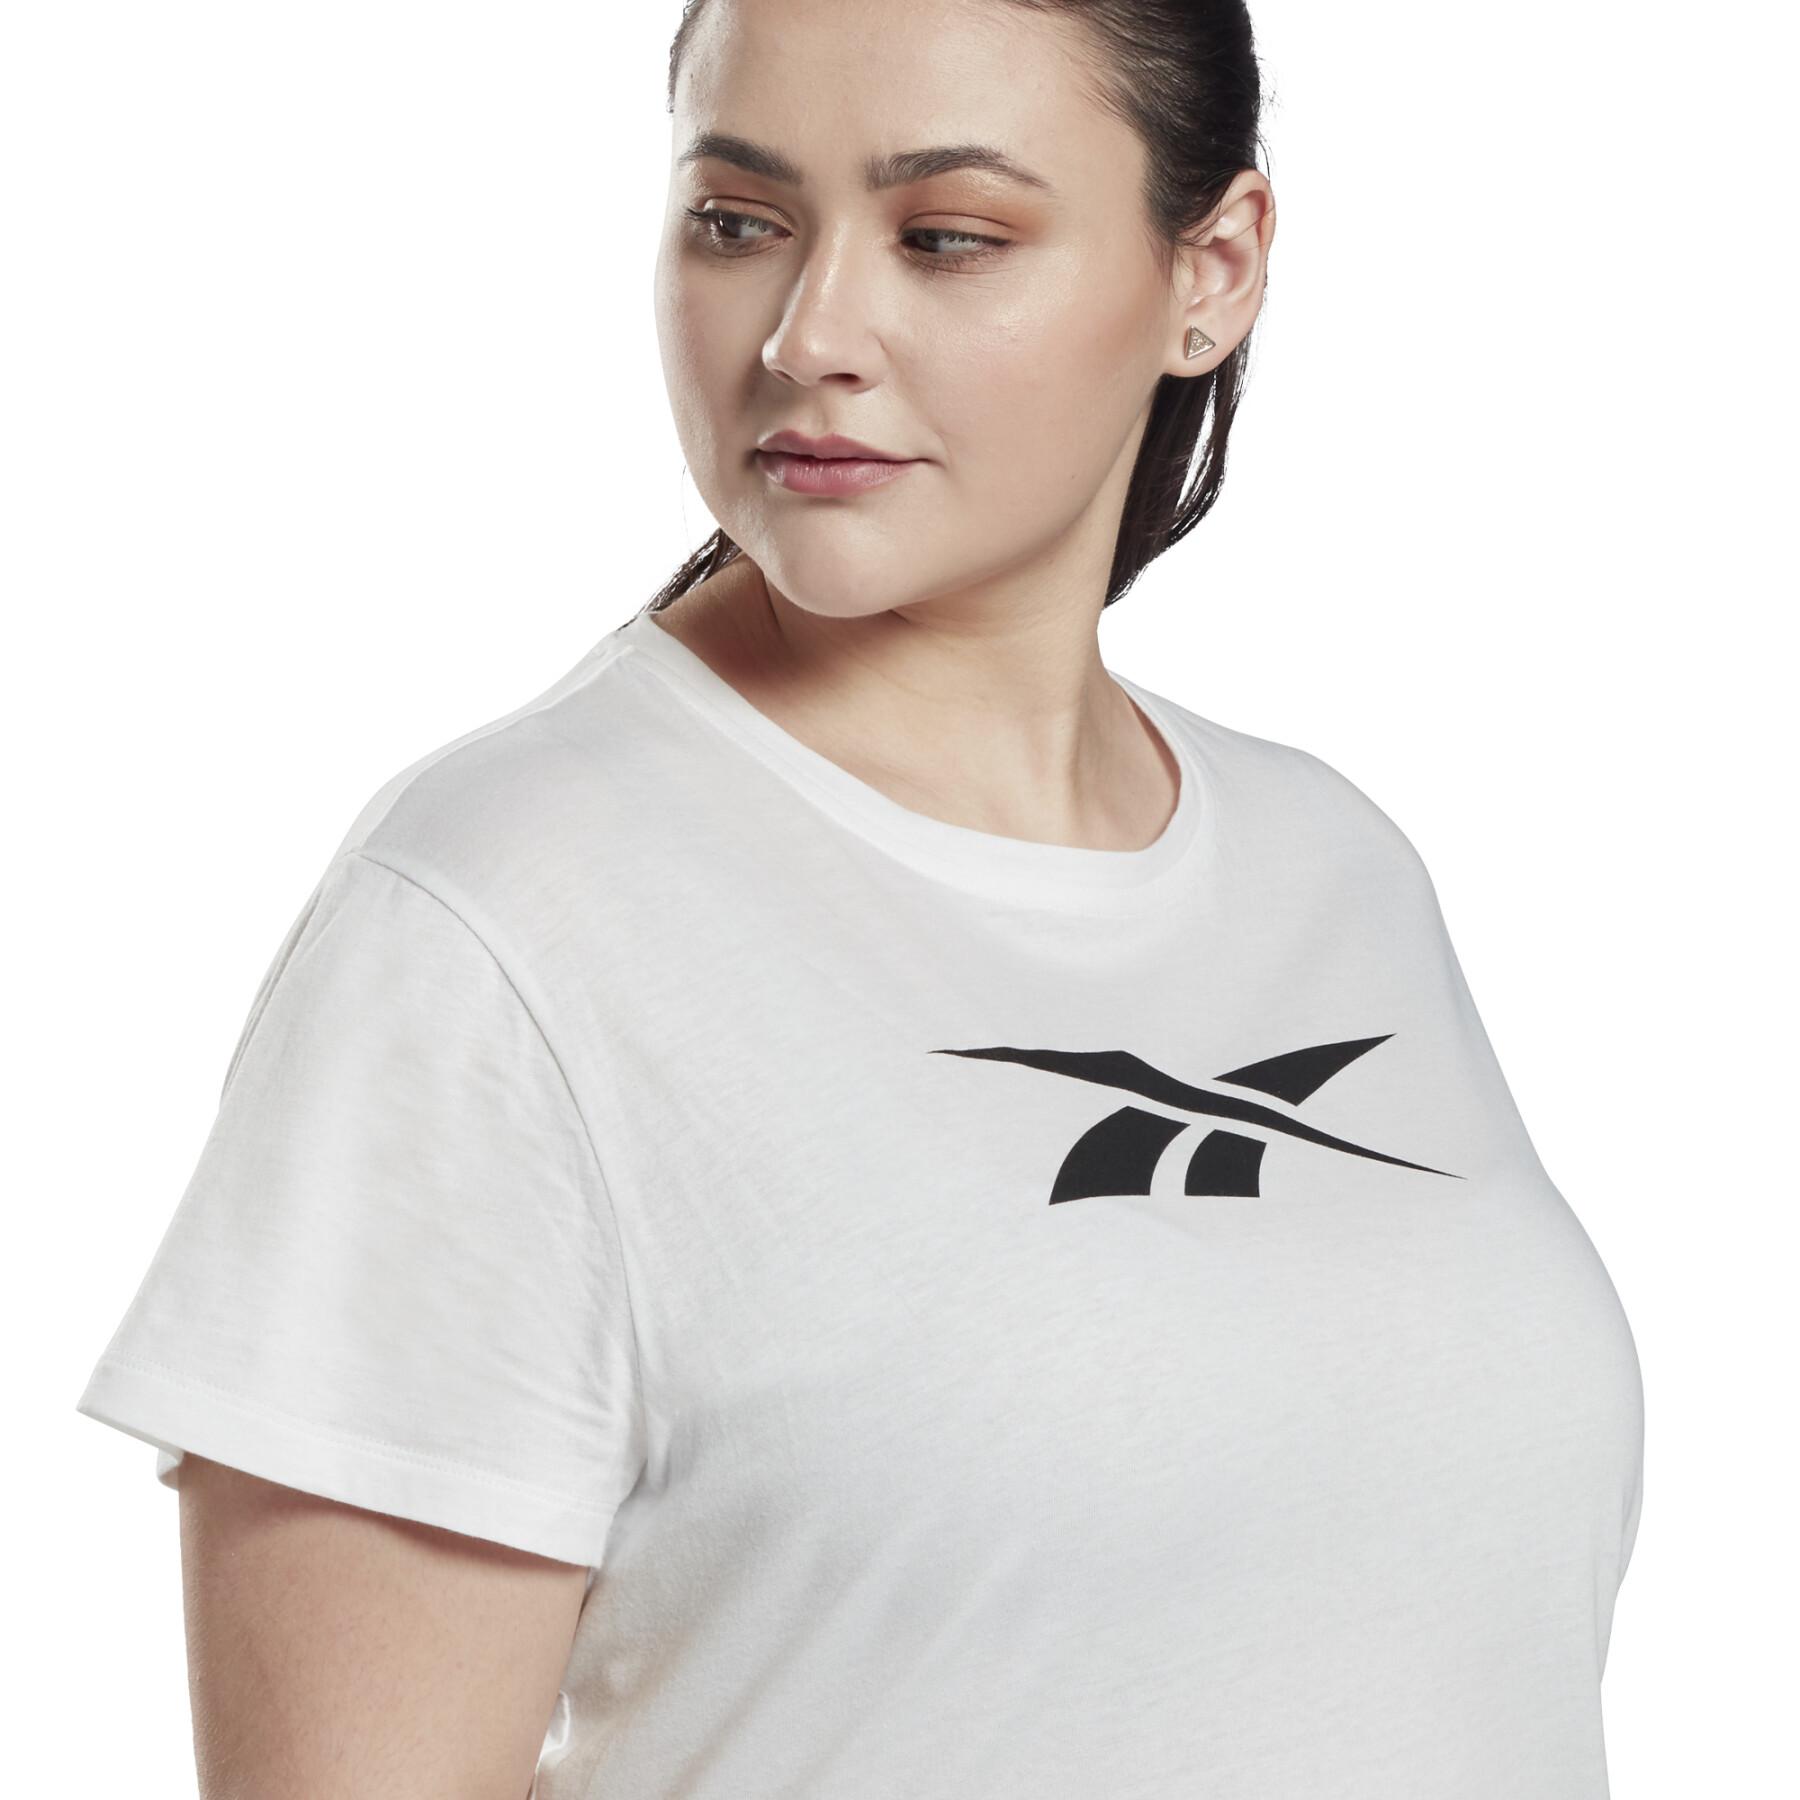 T-shirt femme Reebok Graphic Vector (Grandes tailles)